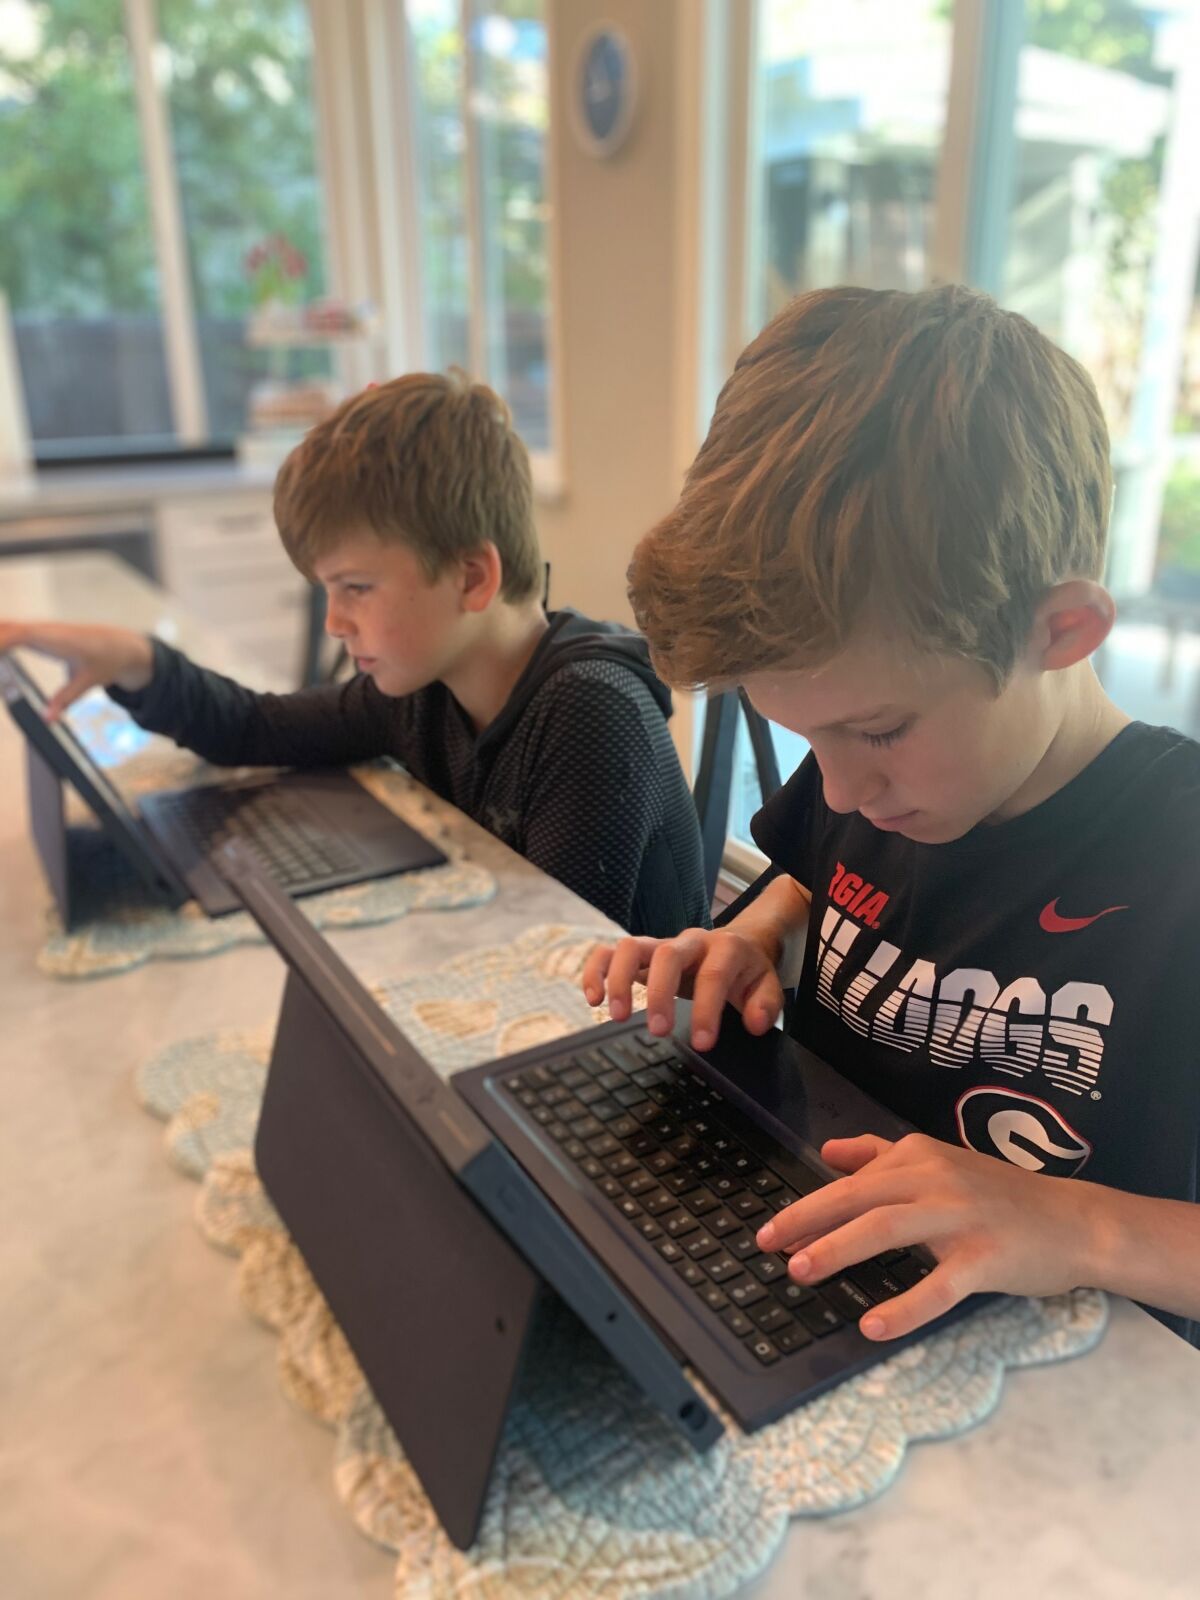 Solana Santa Fe students Liam, sixth grade, and Blake, third grade, began distance learning in their home on March 23.